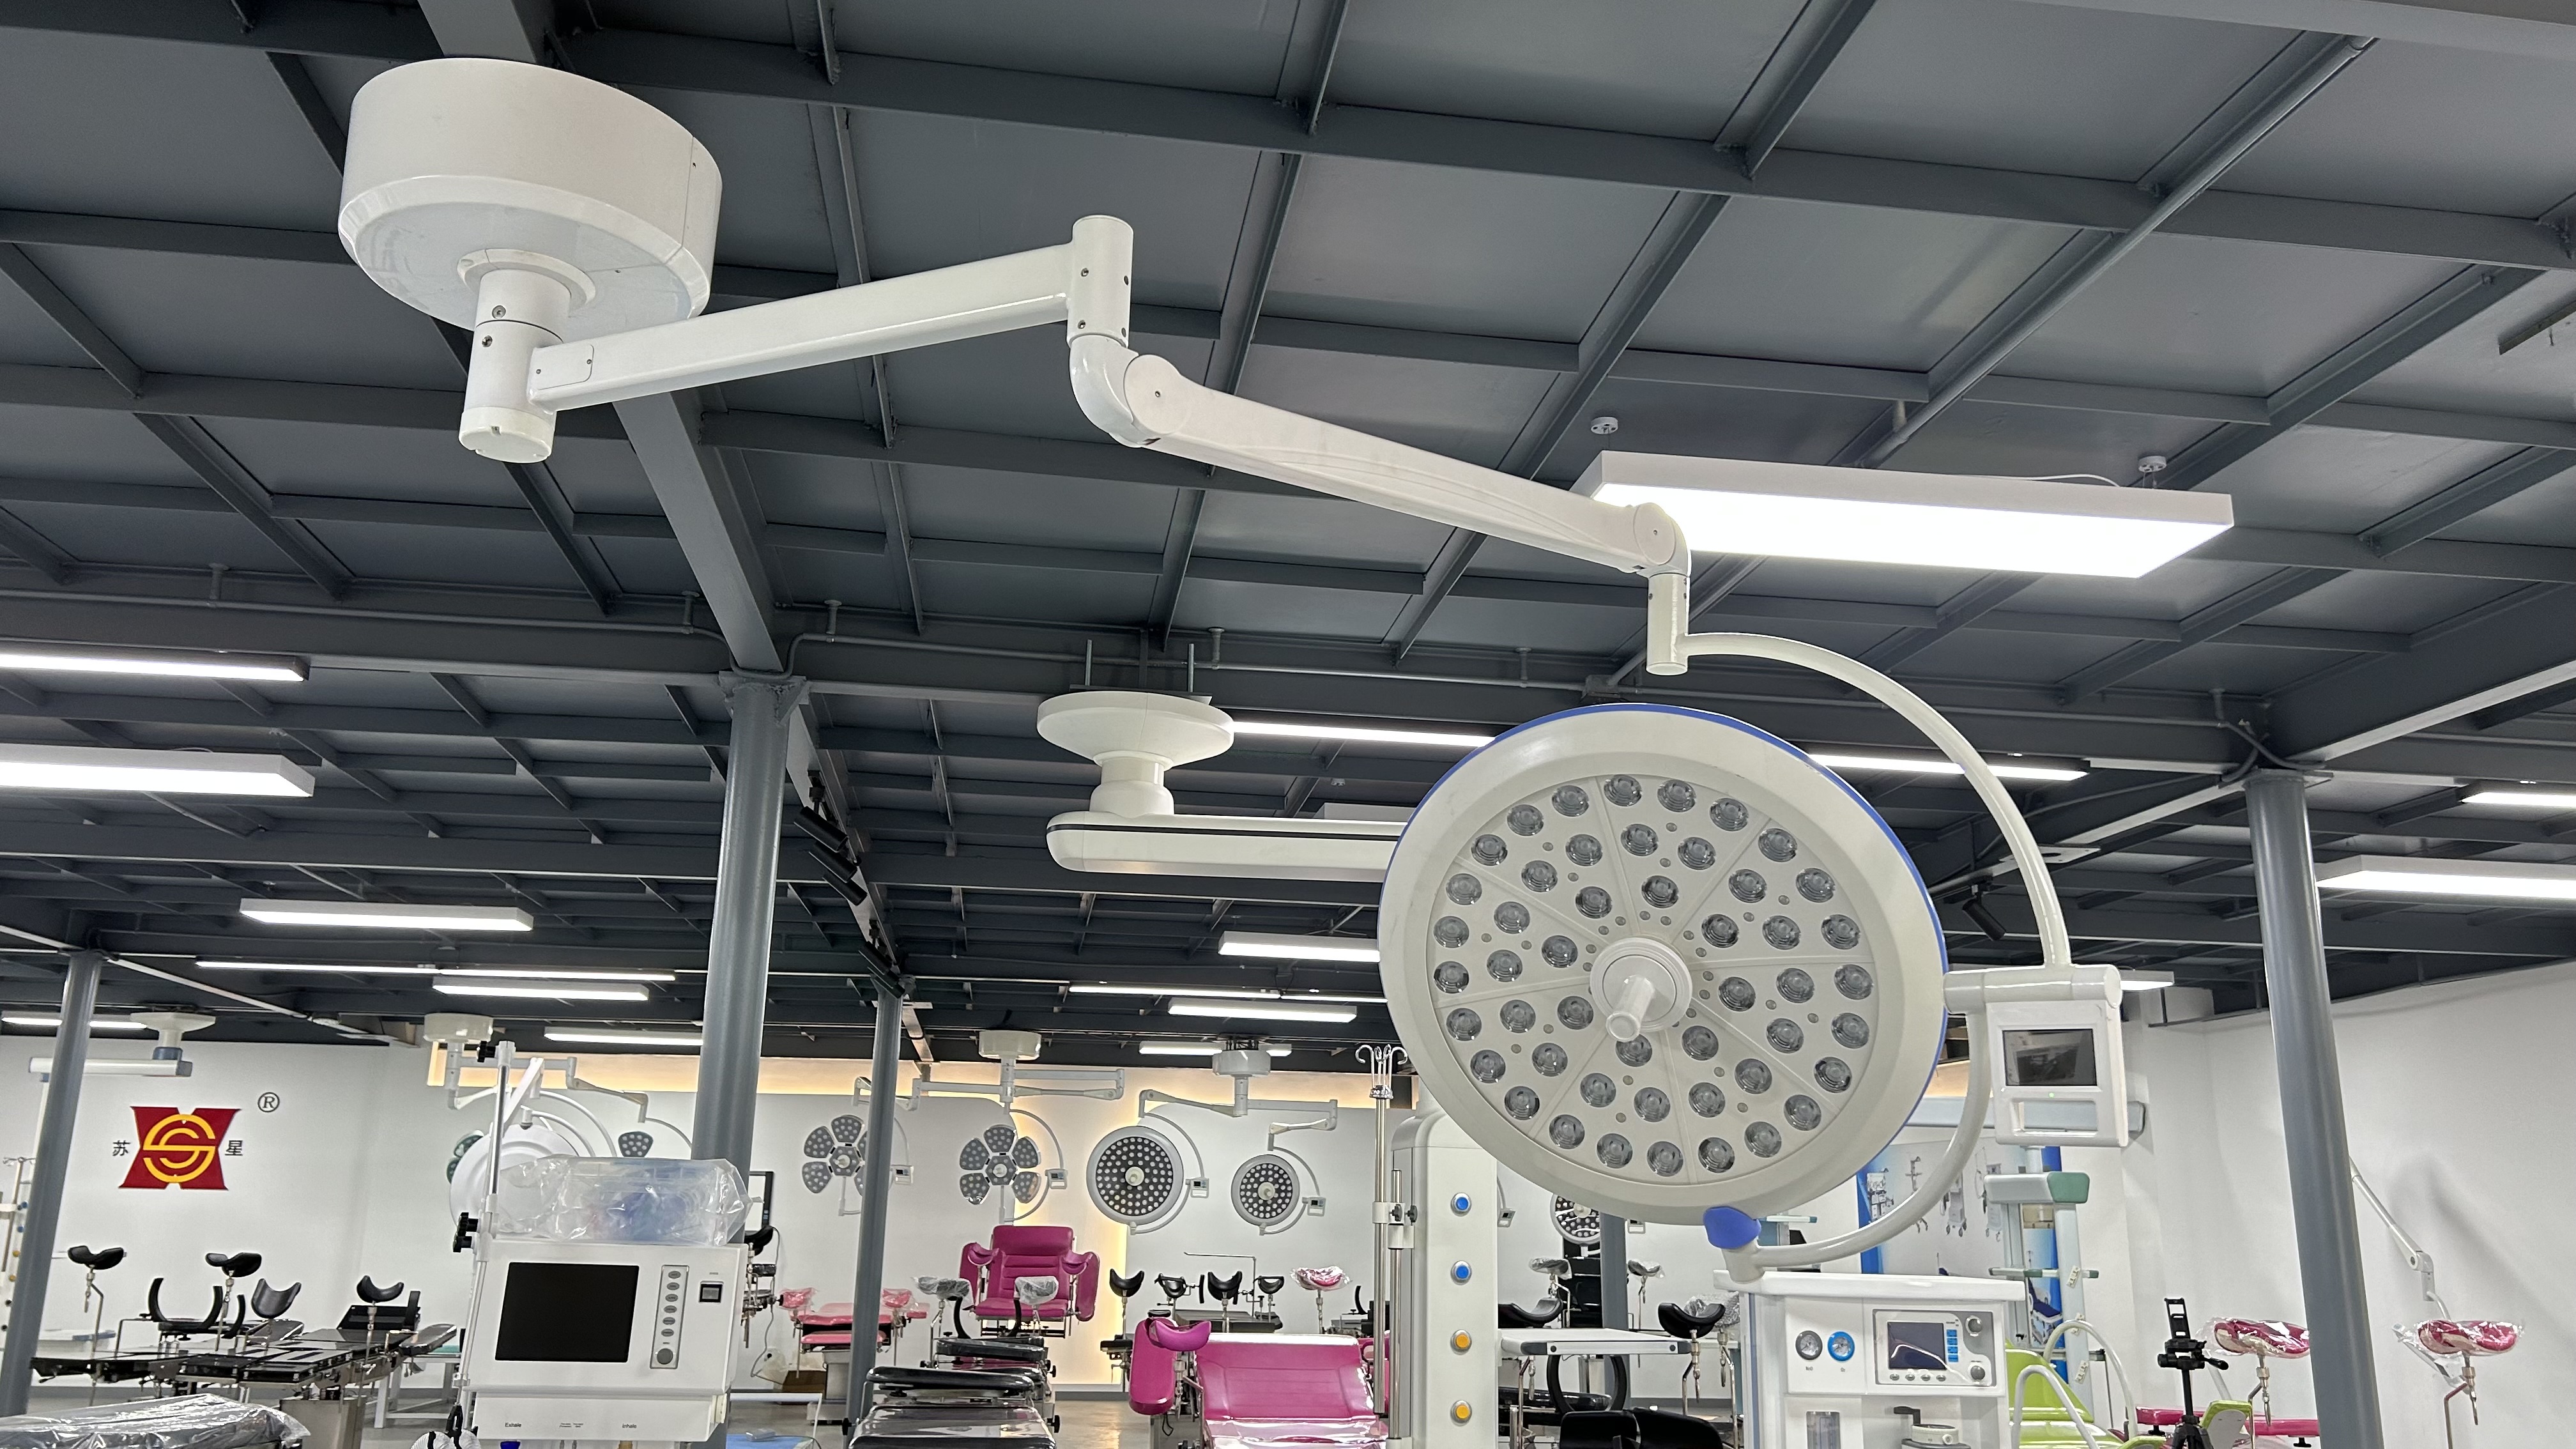  700 Ceiling Led Operating Light Coloful Led Bulb Surgical Lamp with Touchable Panel